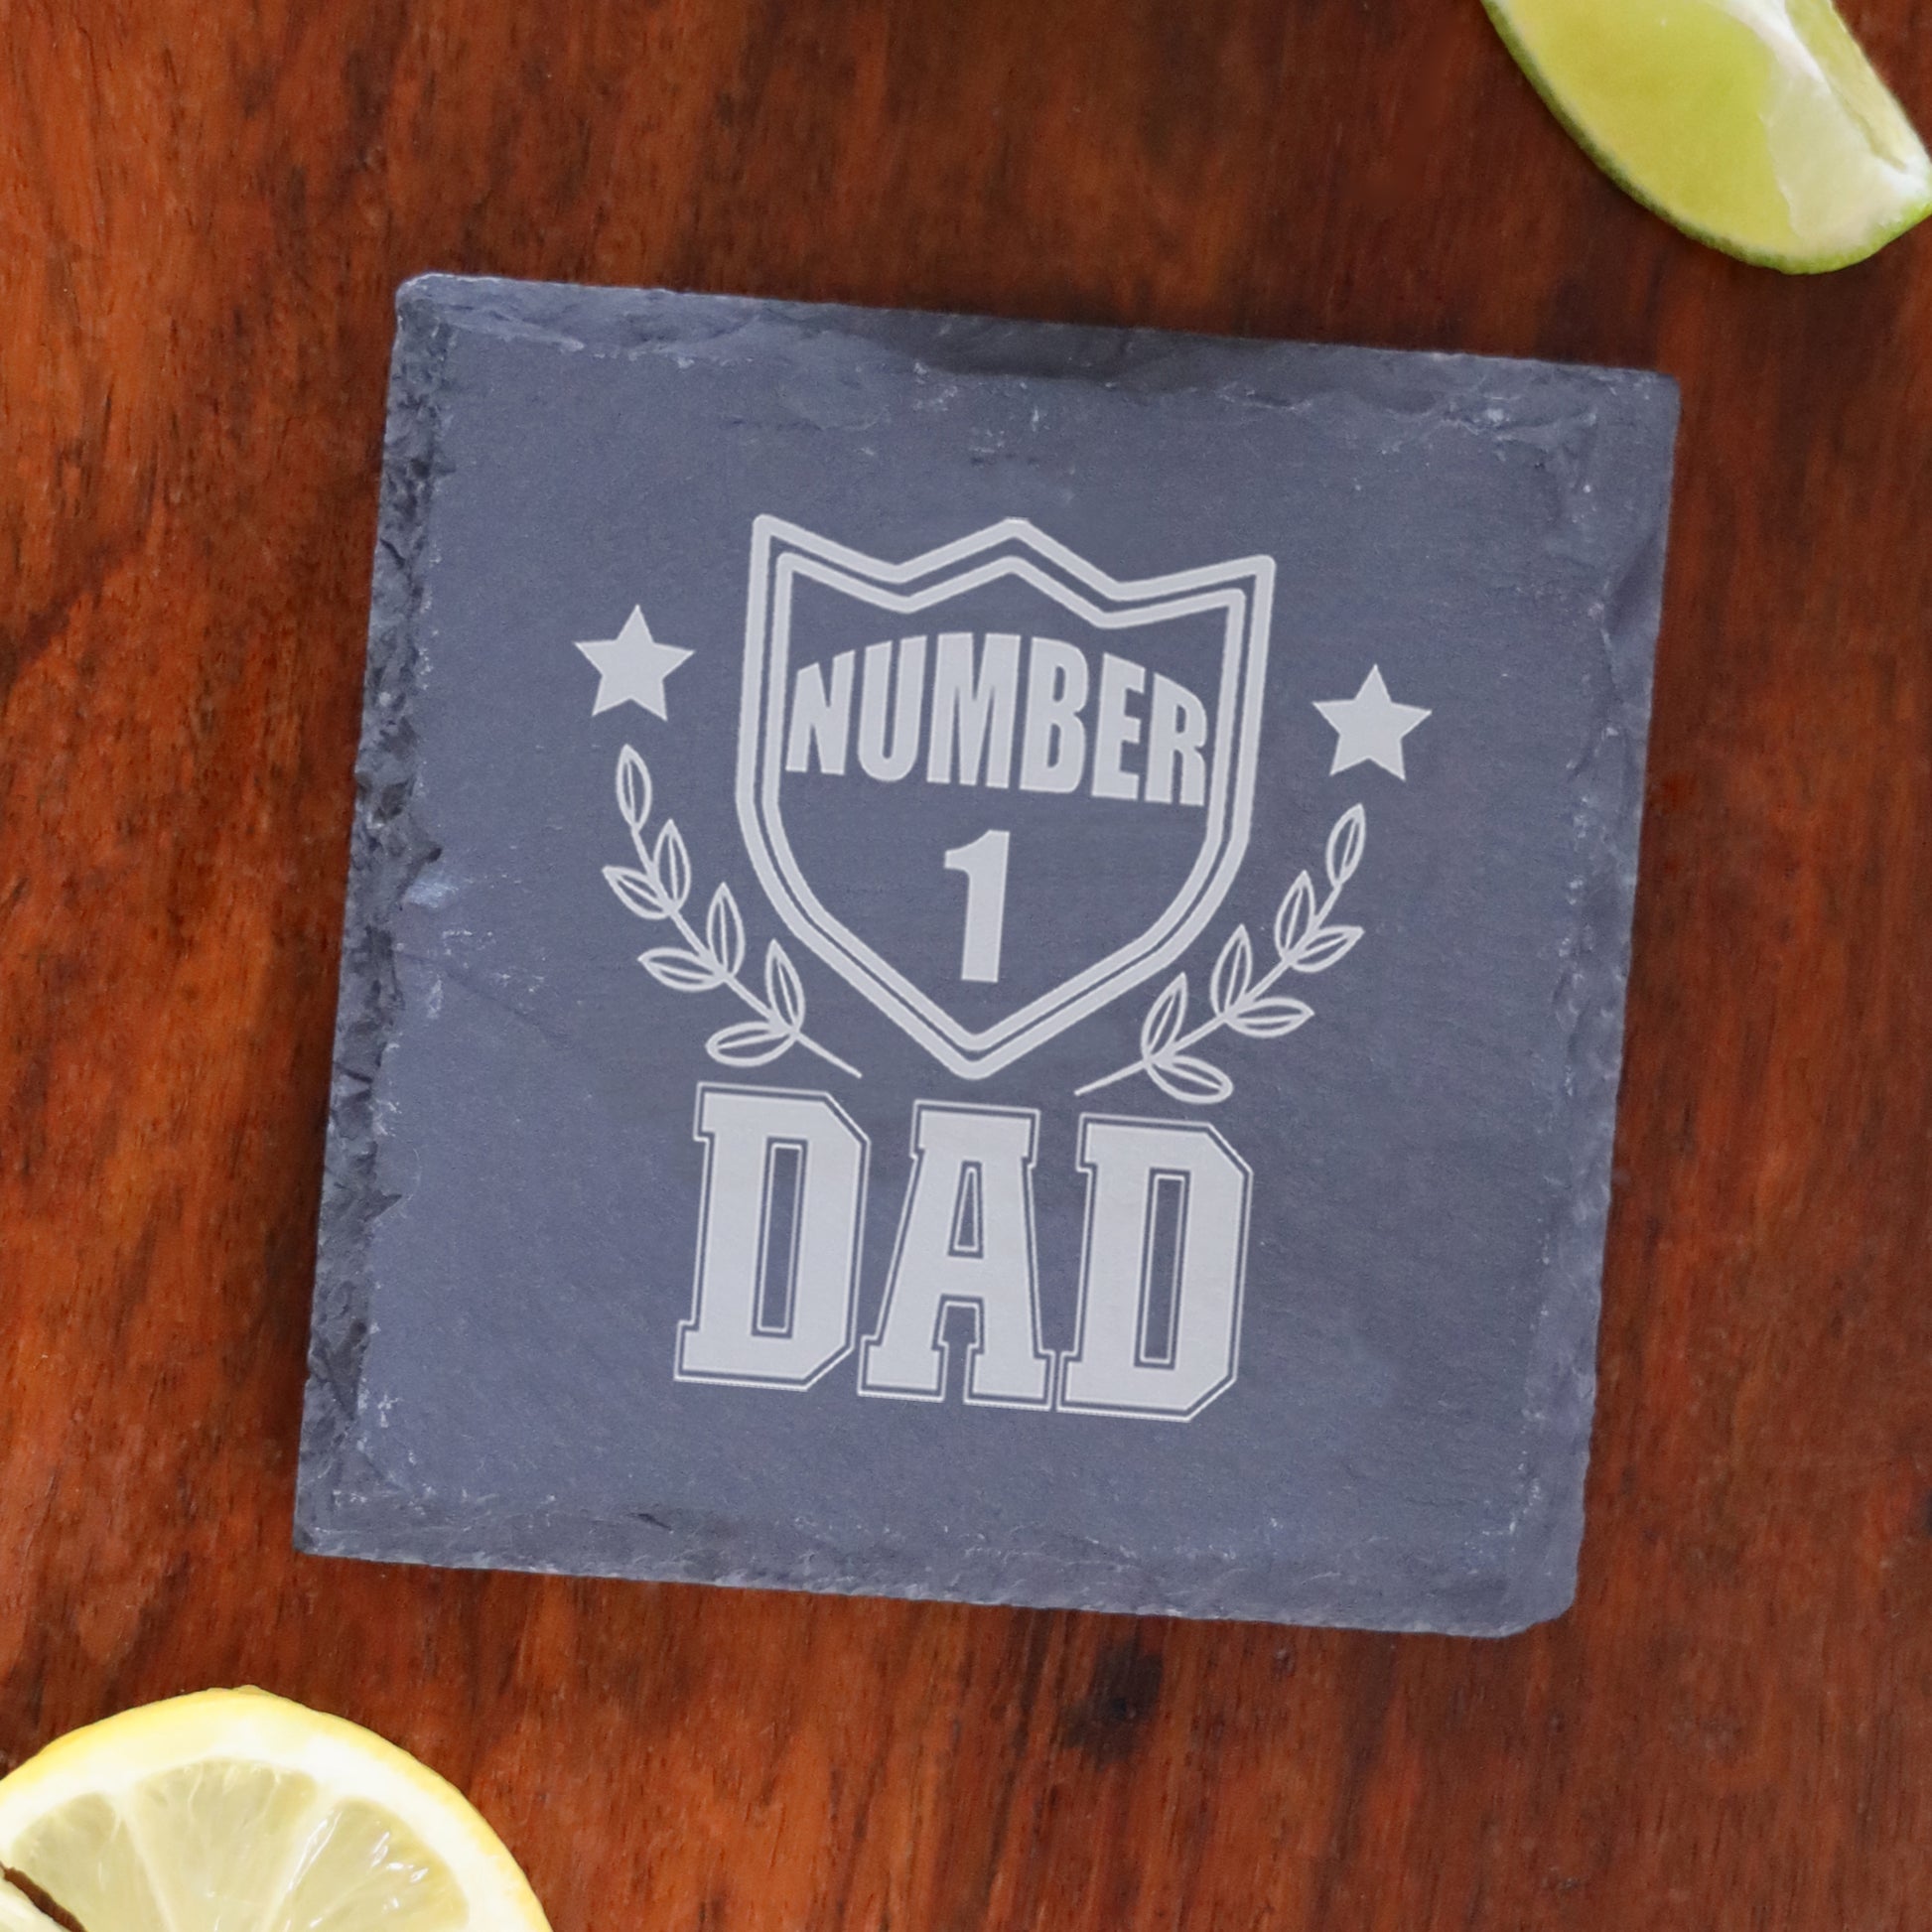 Engraved "Number 1 Dad" Whisky Glass and/or Coaster Set  - Always Looking Good -   